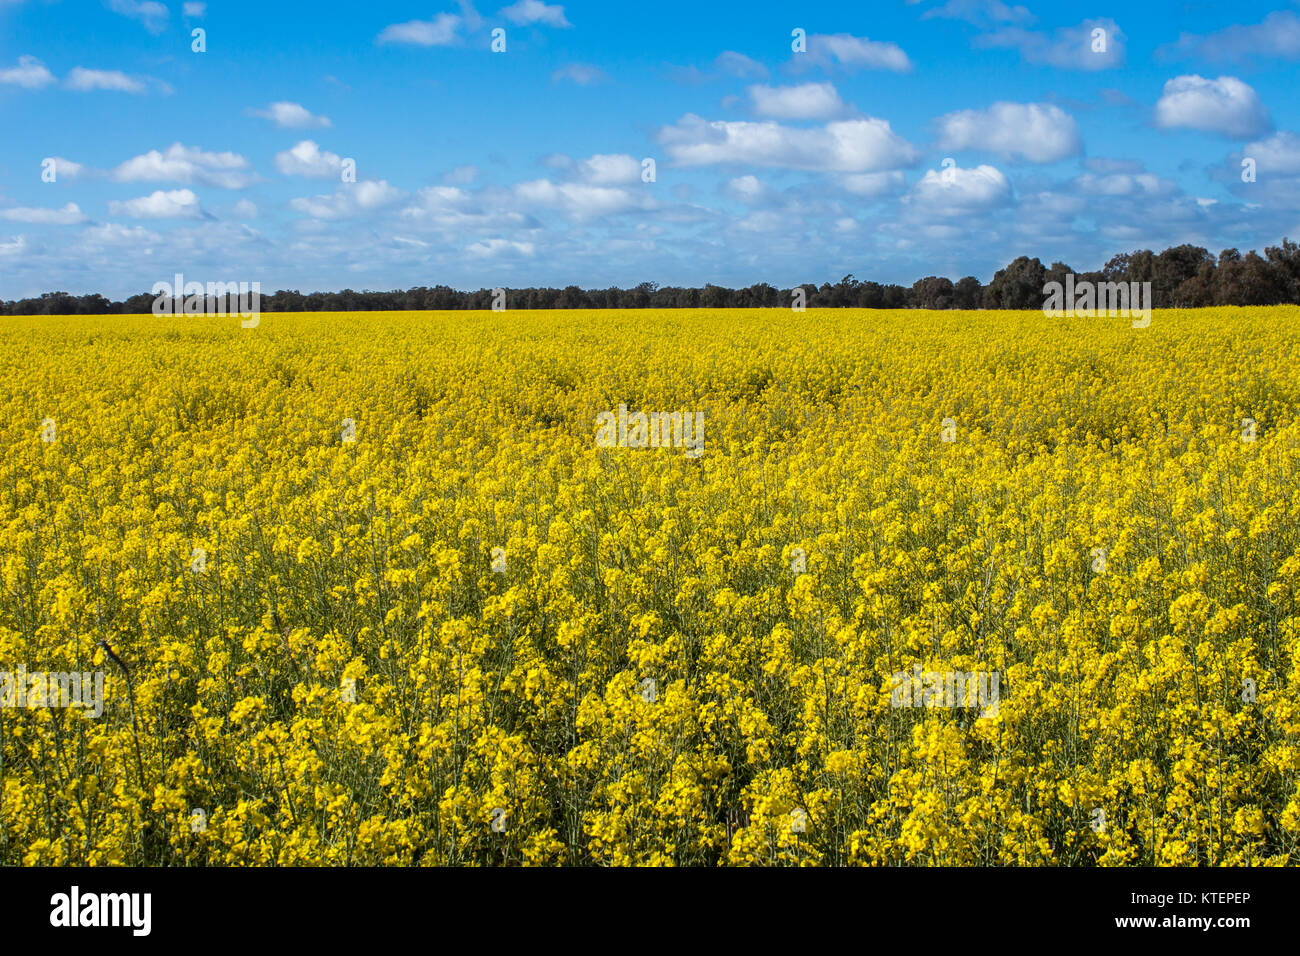 Aerial view of bright yellow canola crops with blue sky on farmland in Narromine, New South Wales, Australia Stock Photo